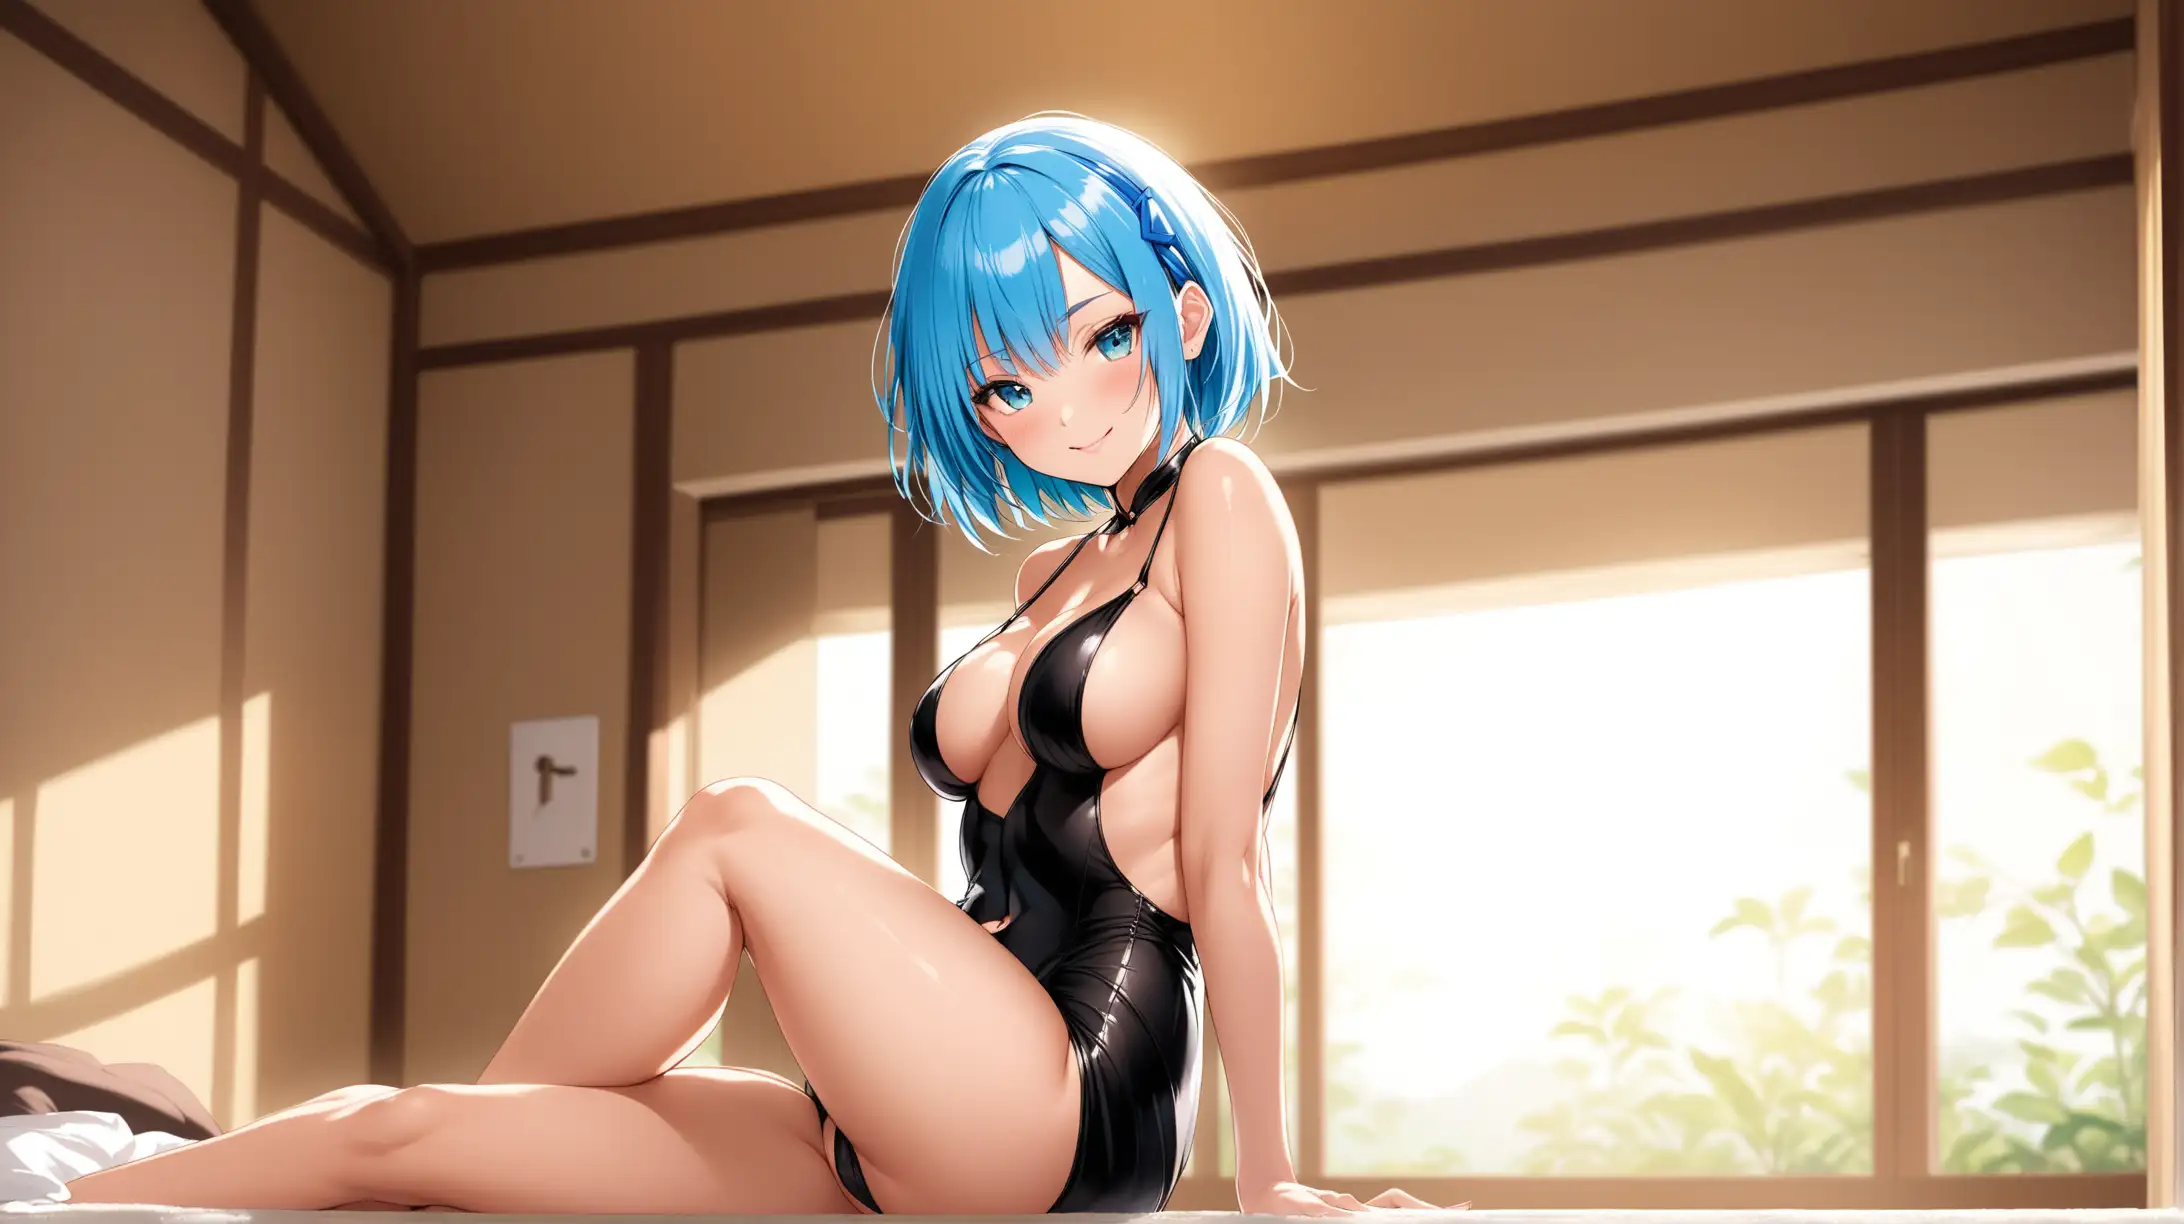 Draw the character Rem, high quality, natural lighting, long shot, indoors, seductive pose, revealing outfit, erotic, smiling at the viewer